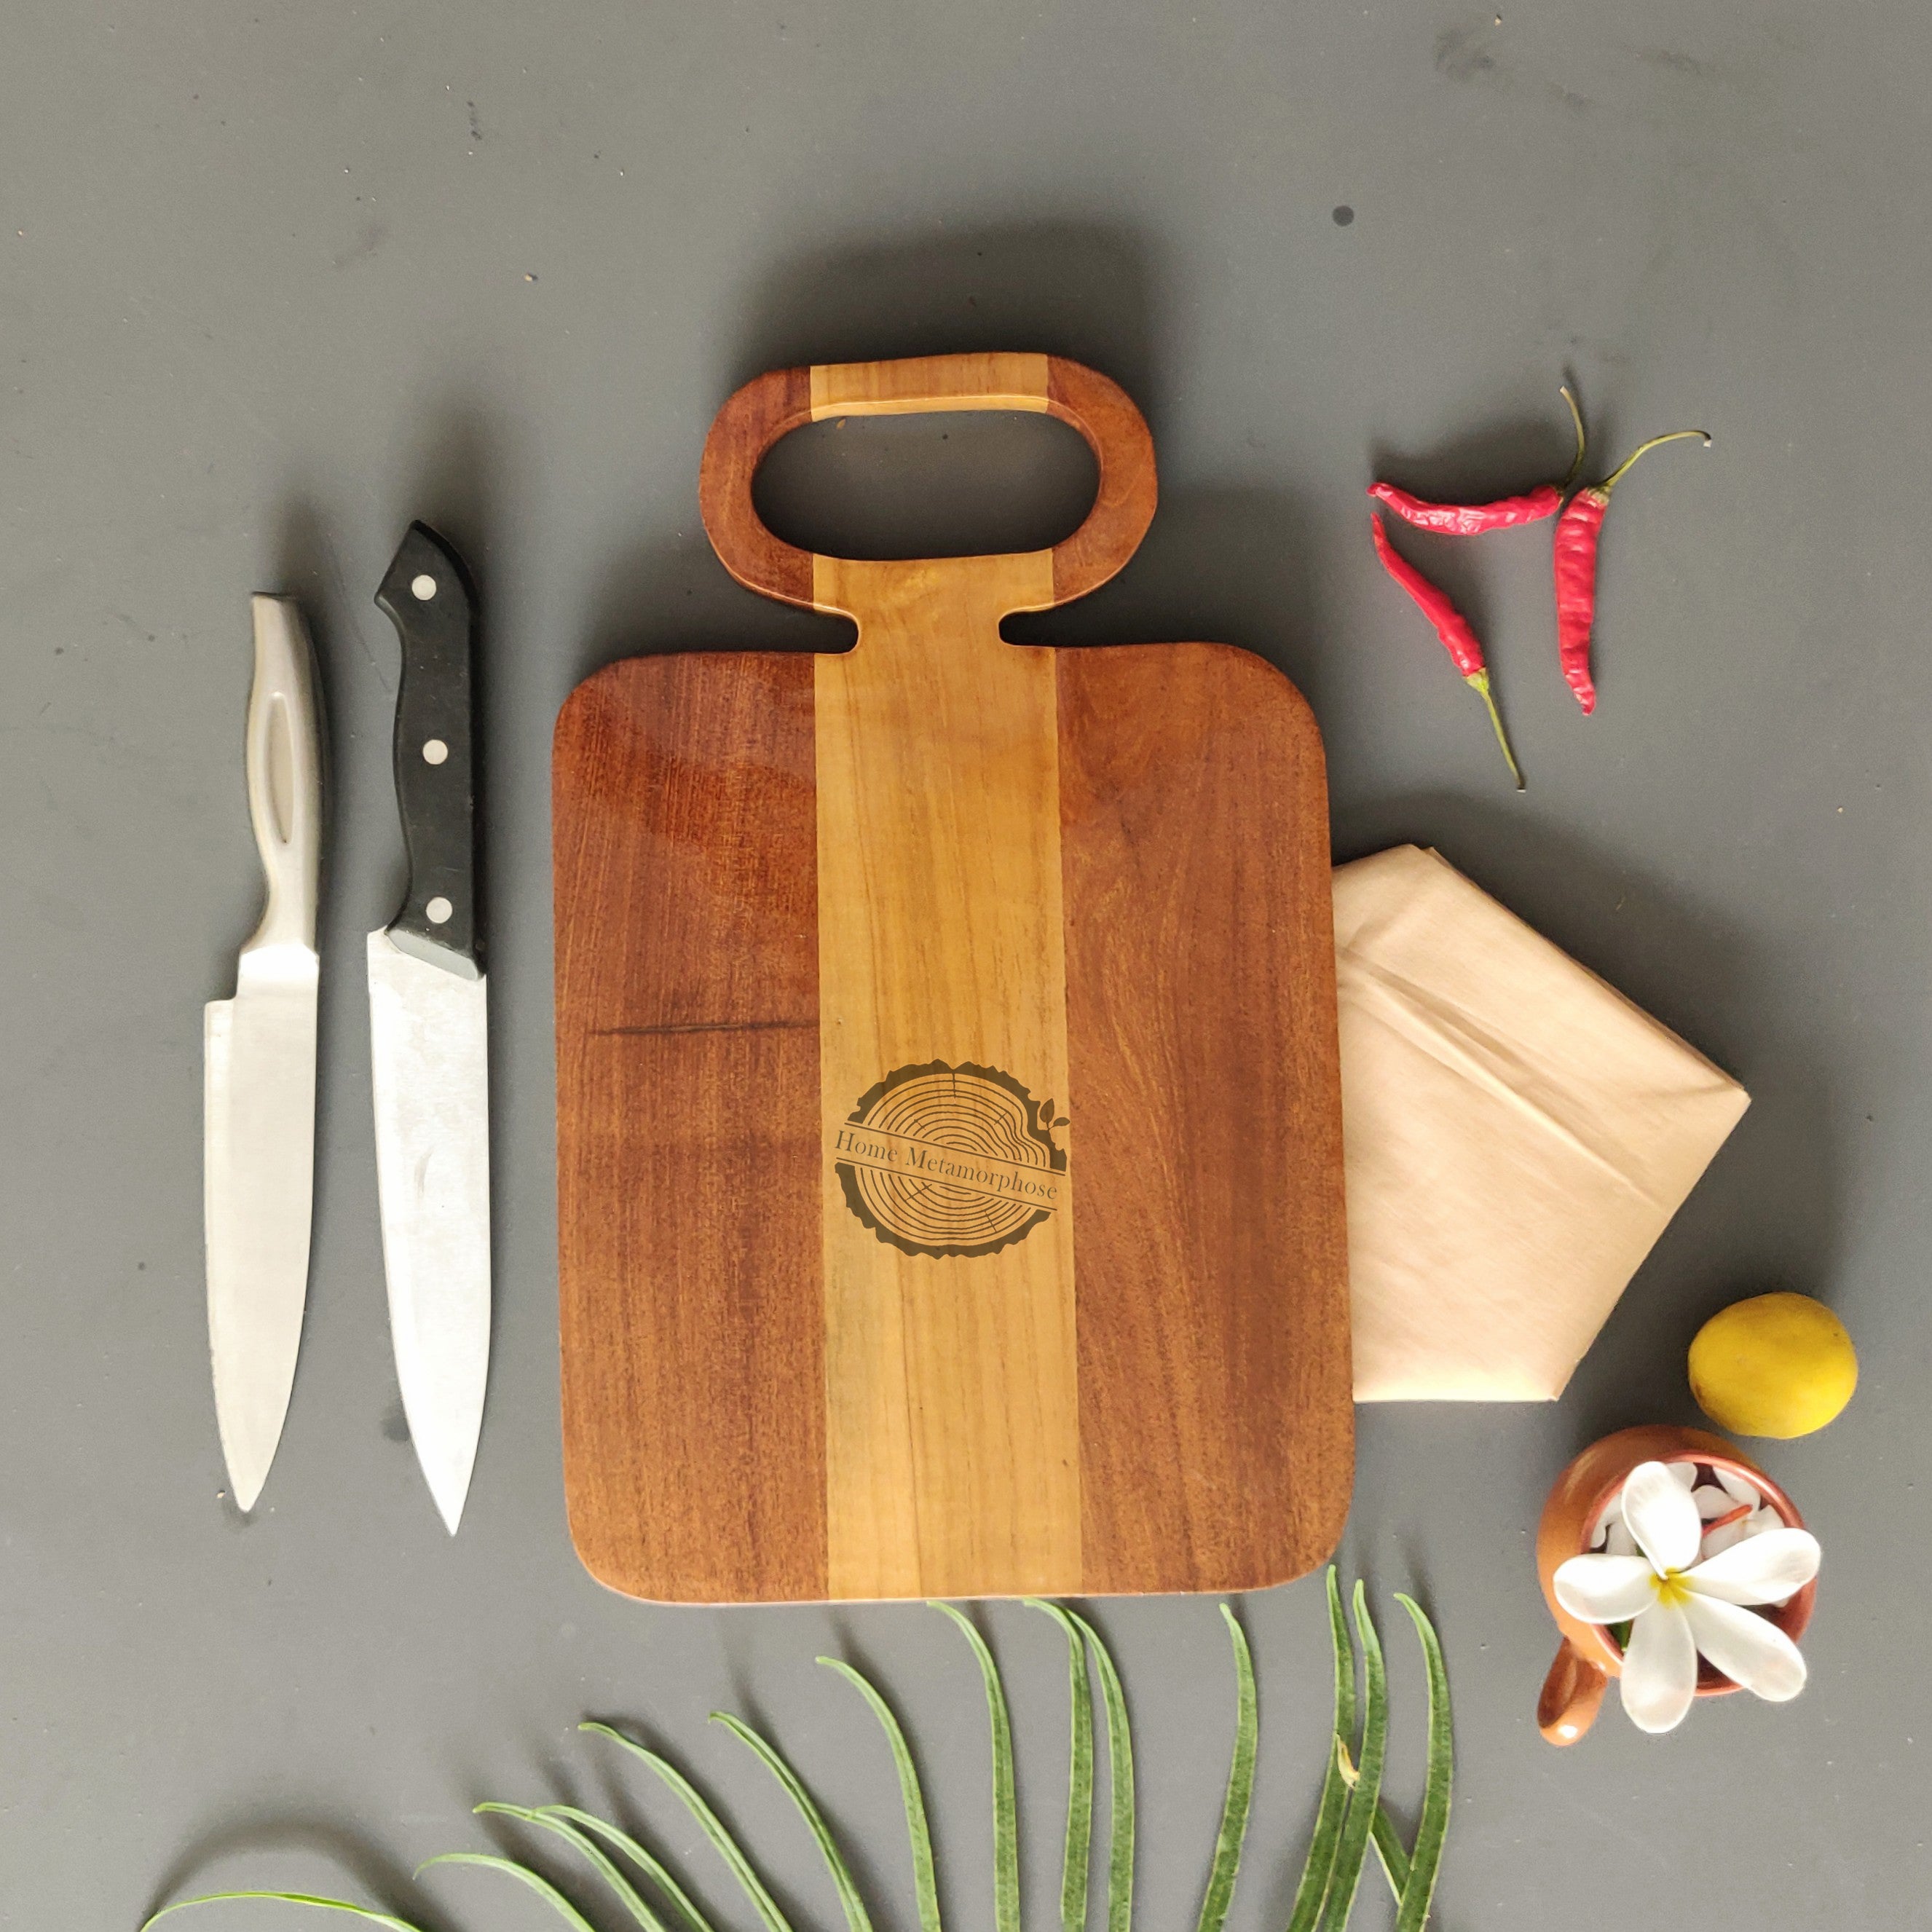 Wood Cutting Board With Handle - Wooden Charcuterie Board For Bread, Meat, Fruits, Cheese And Serving，Butcher Block Carving Board For Kitchen Chopping，18 X 10 Inch